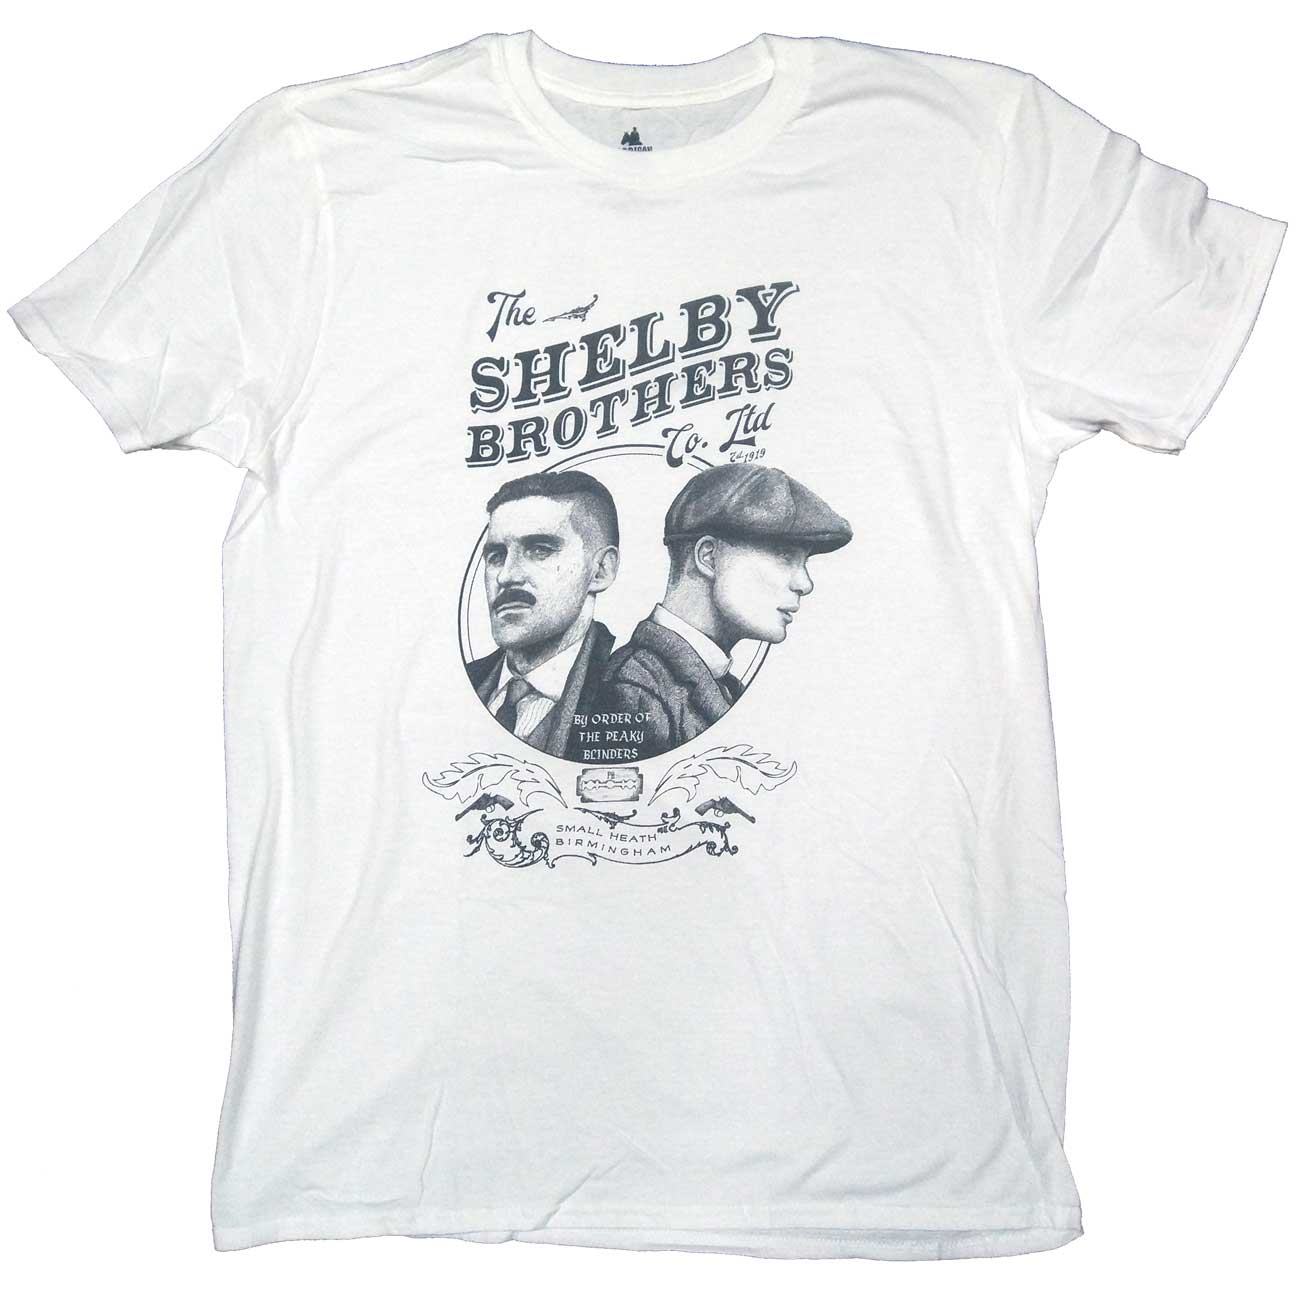 Peaky Blinders T Shirt - Shelby Brothers Co. Ltd 100% Officially Licensed Merchandise